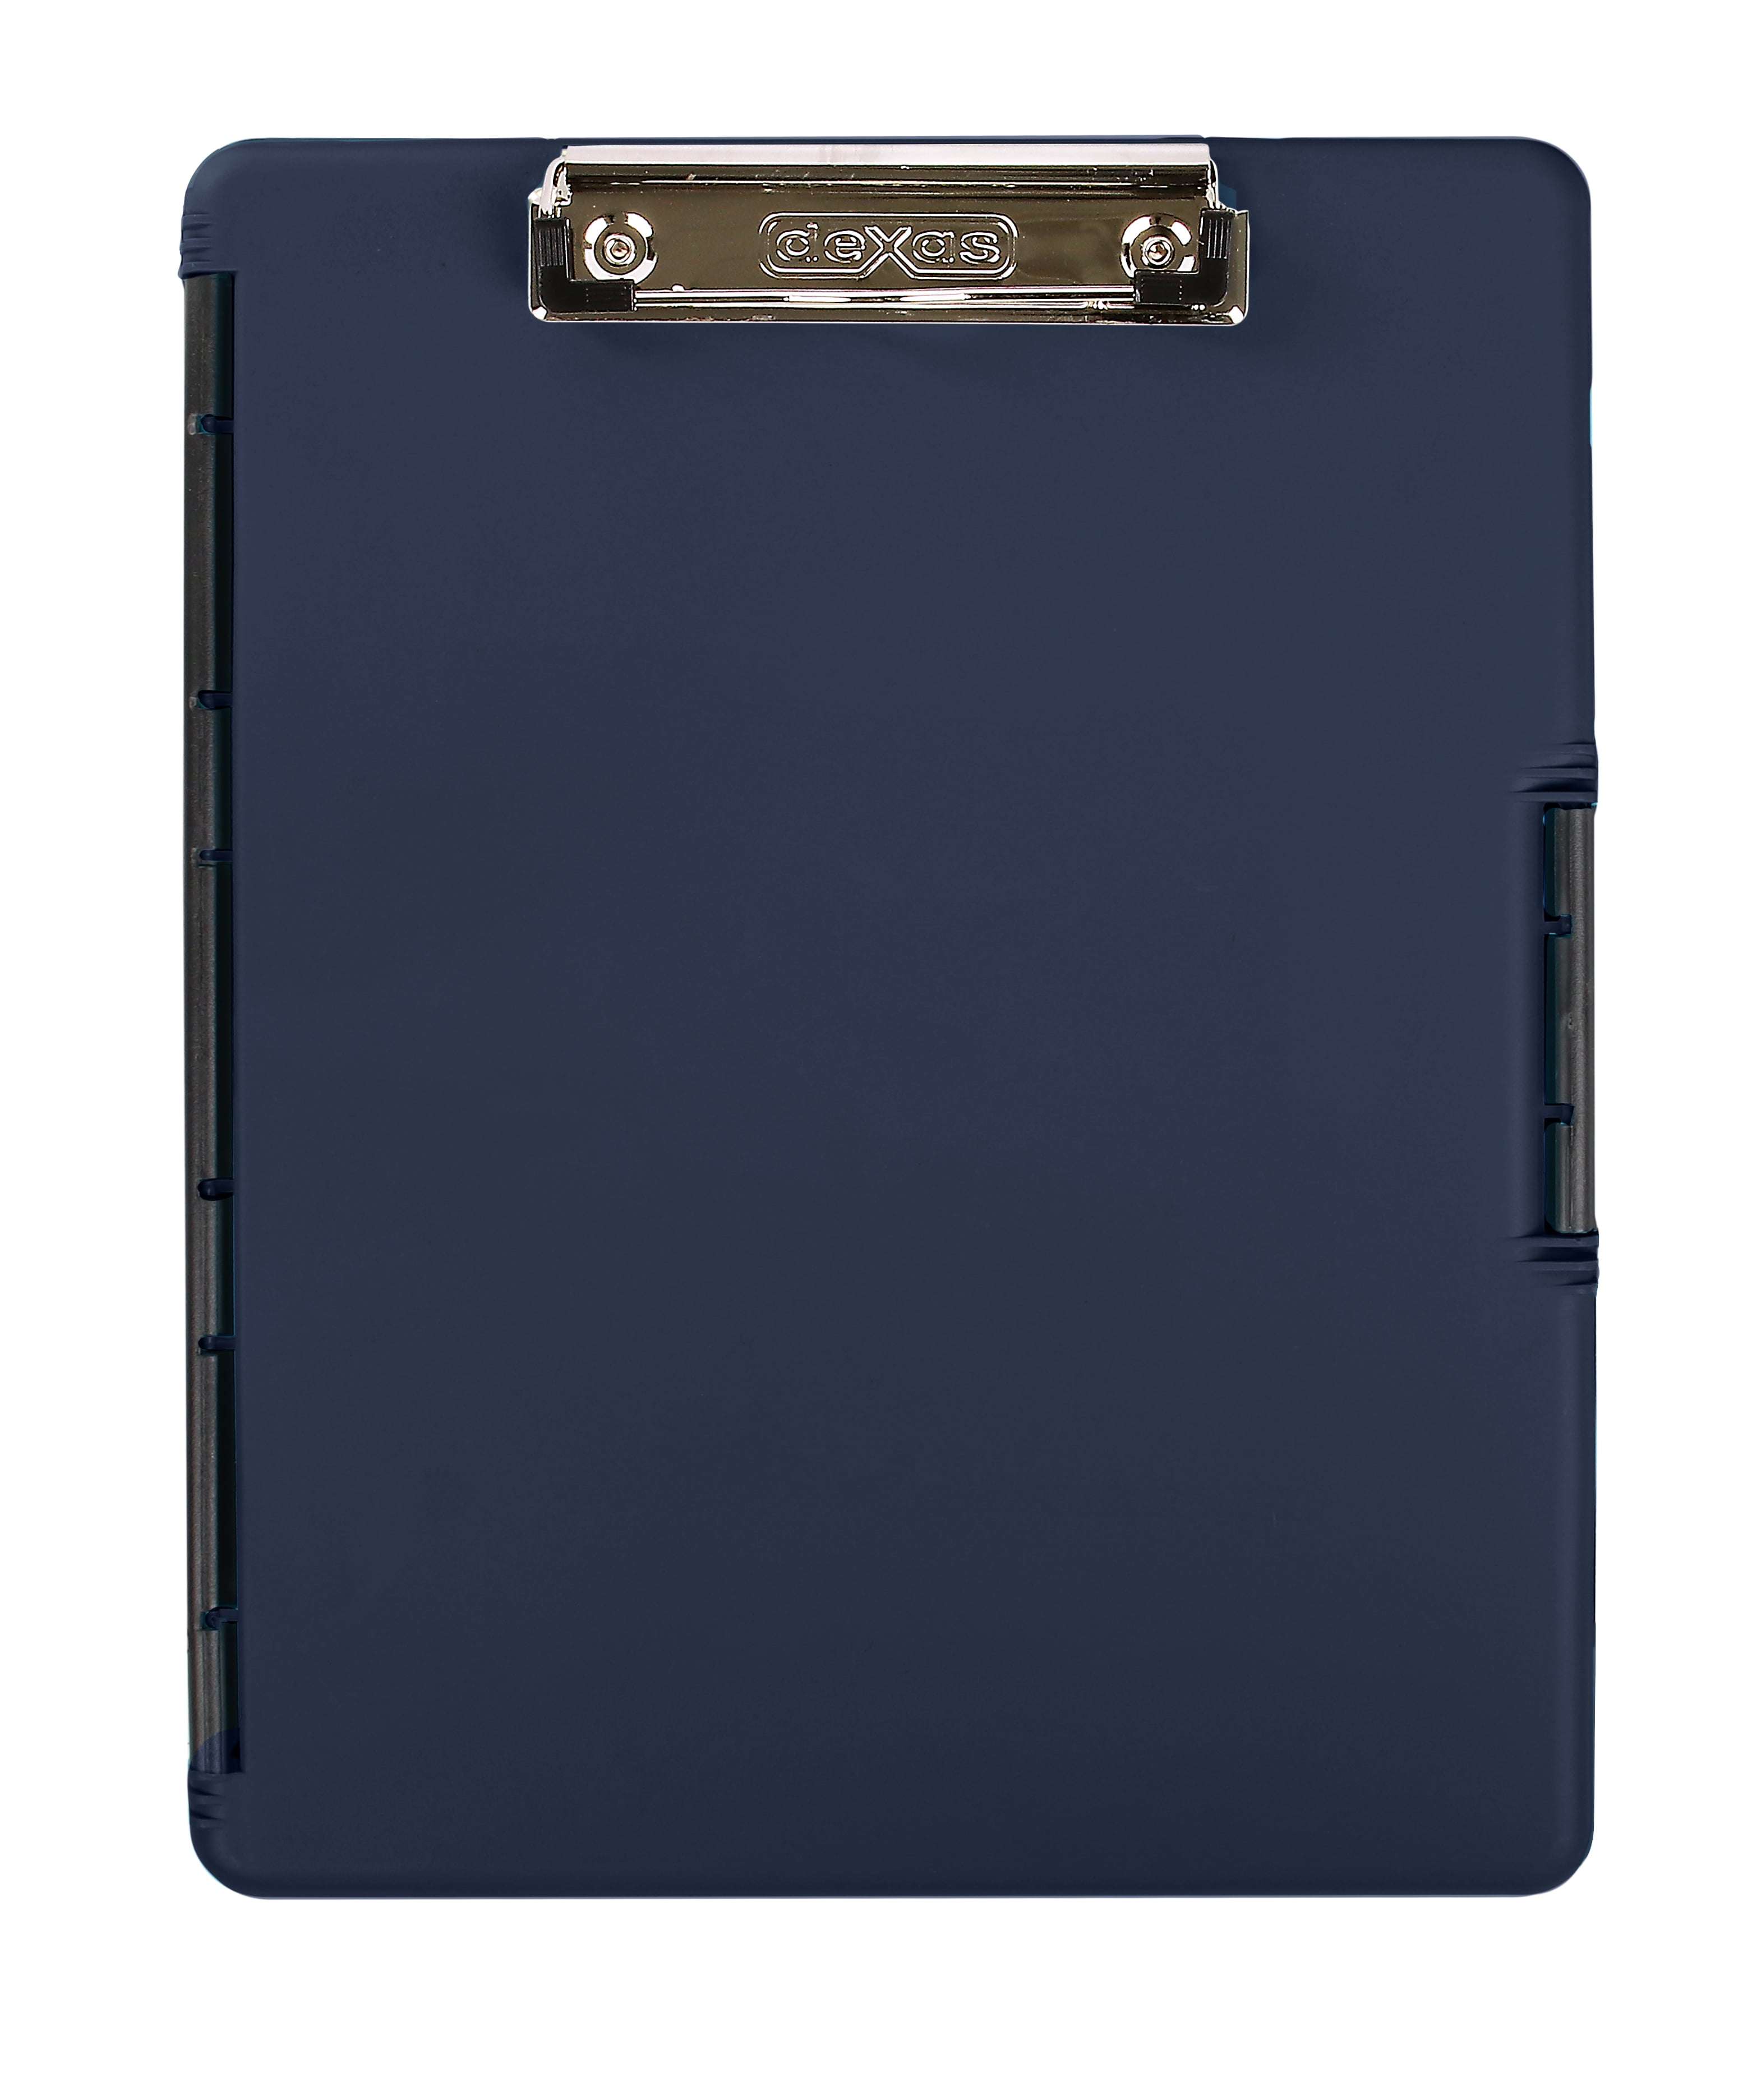 Pen + Gear Storage Clipboard and Form Holder. 12.5" x 9.5", Holds Standard Paper.